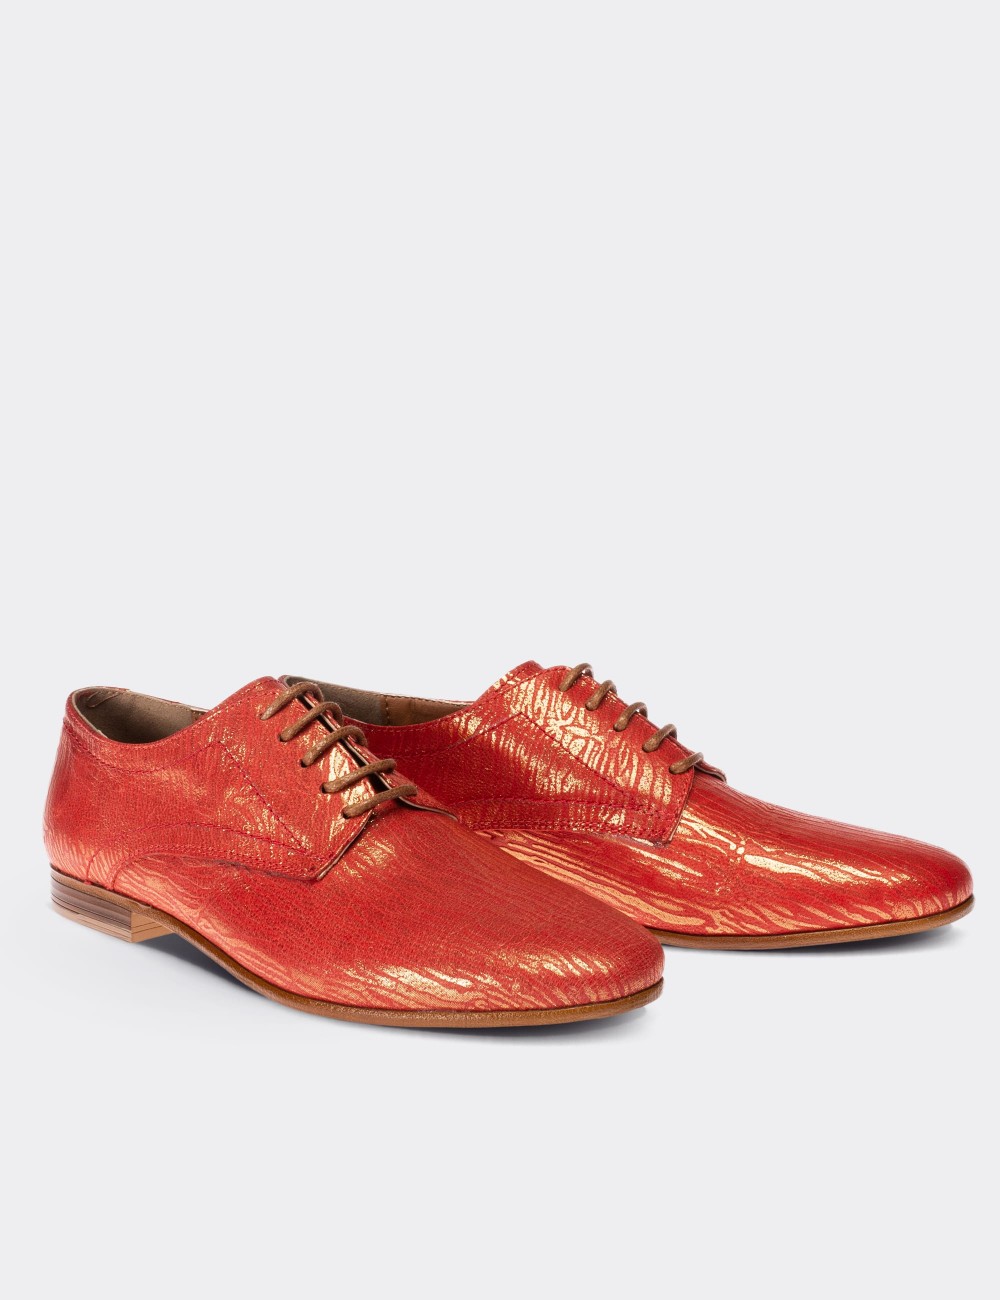 Red Nubuck Leather Lace-up Shoes - 01430ZKRMC01